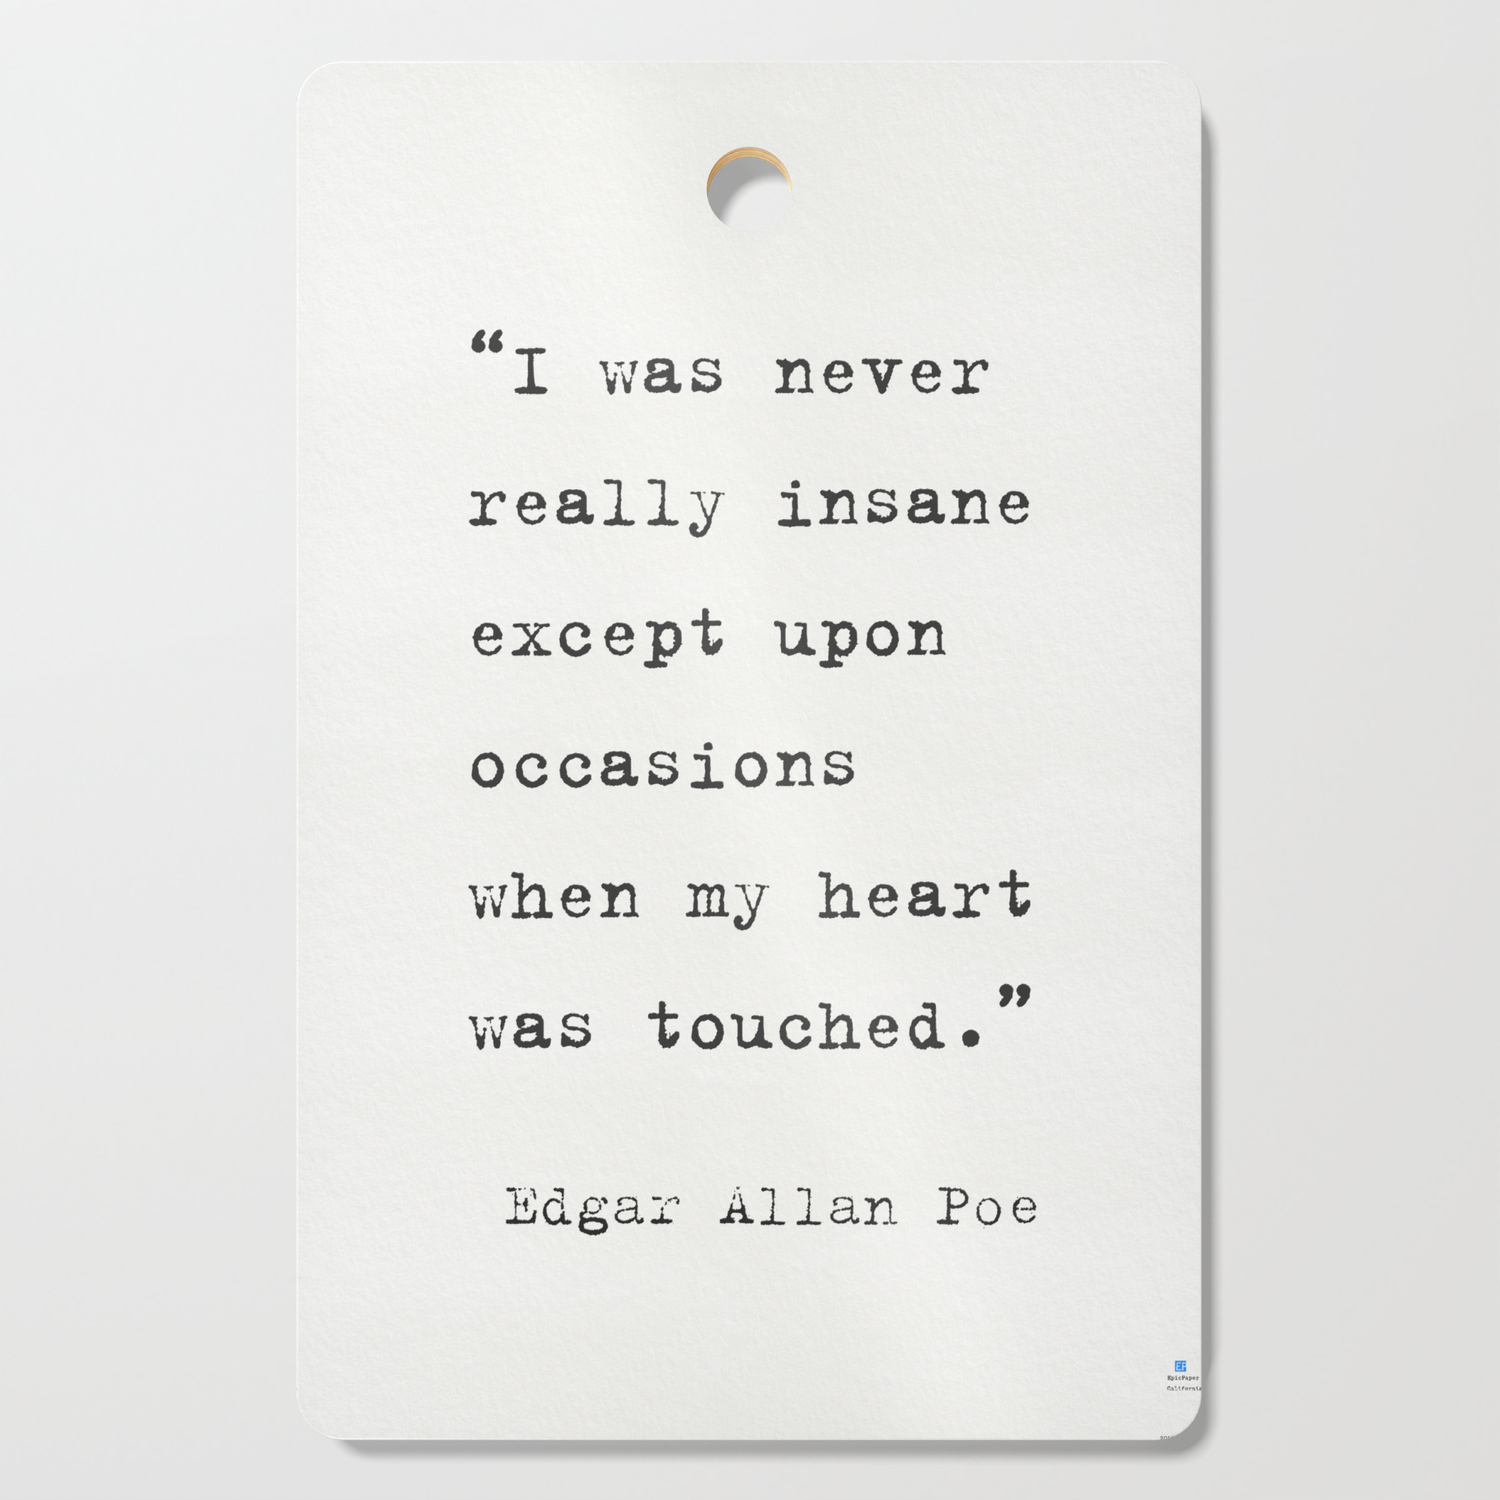 Edgar Allan Poe quote 9 Cutting Board by epic paper | Society6